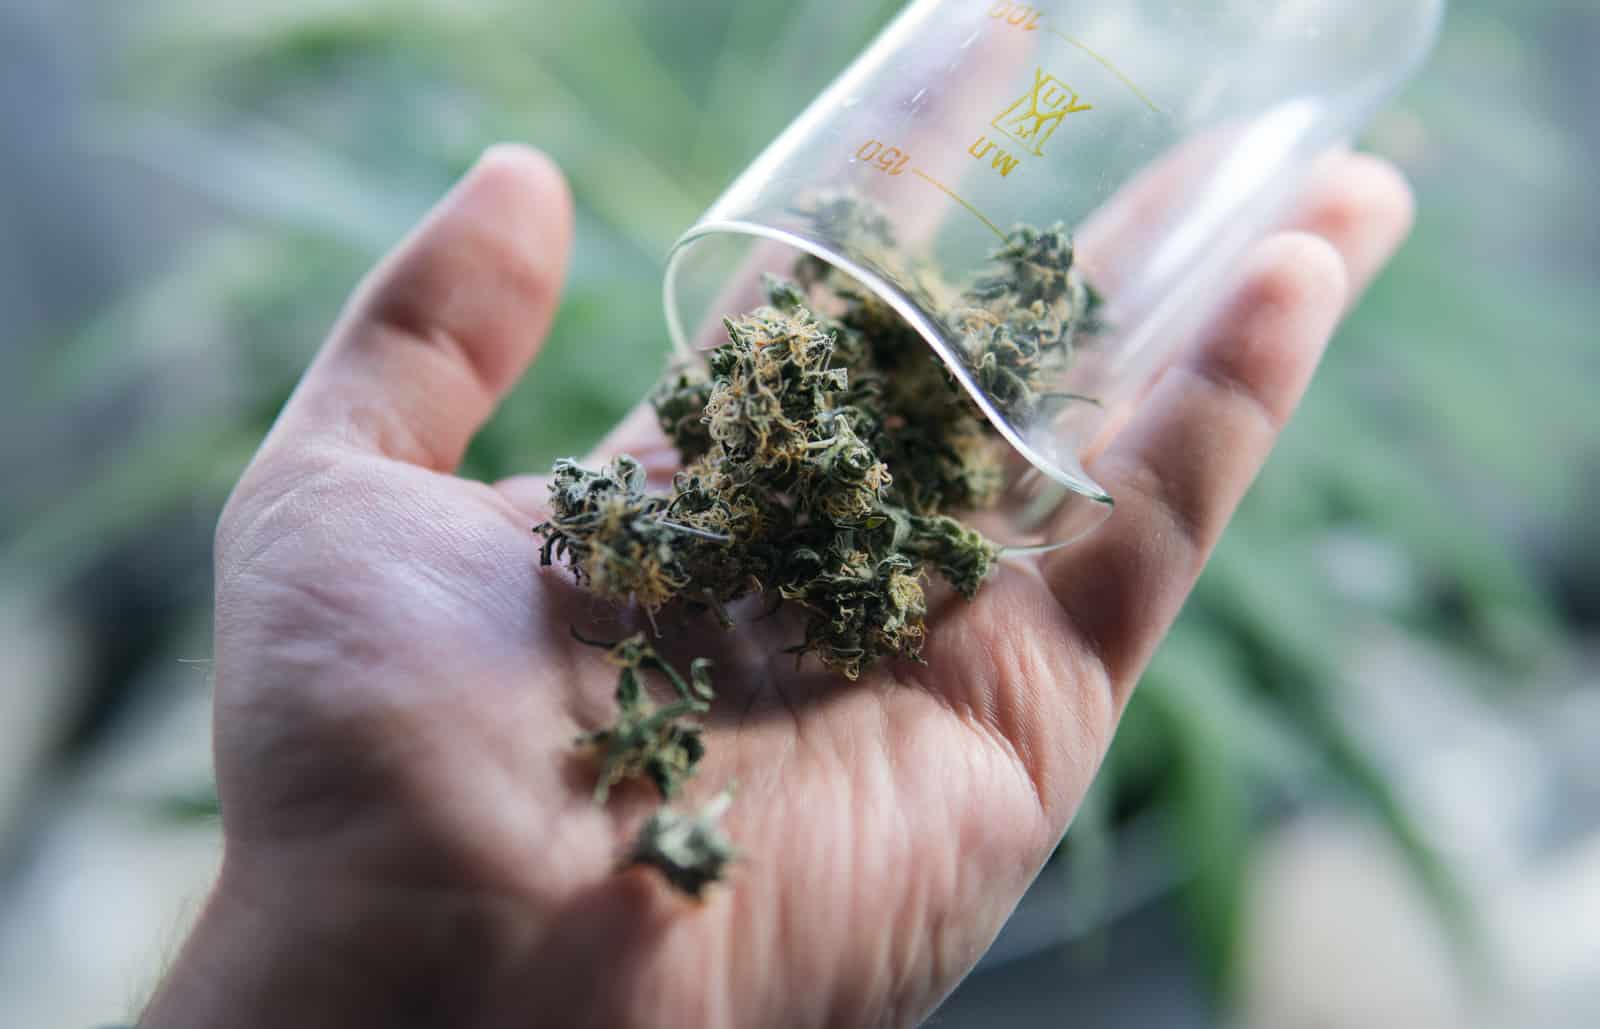 Frequently Asked Questions About Marijuana and the Workplace. A hand holding marijuana.